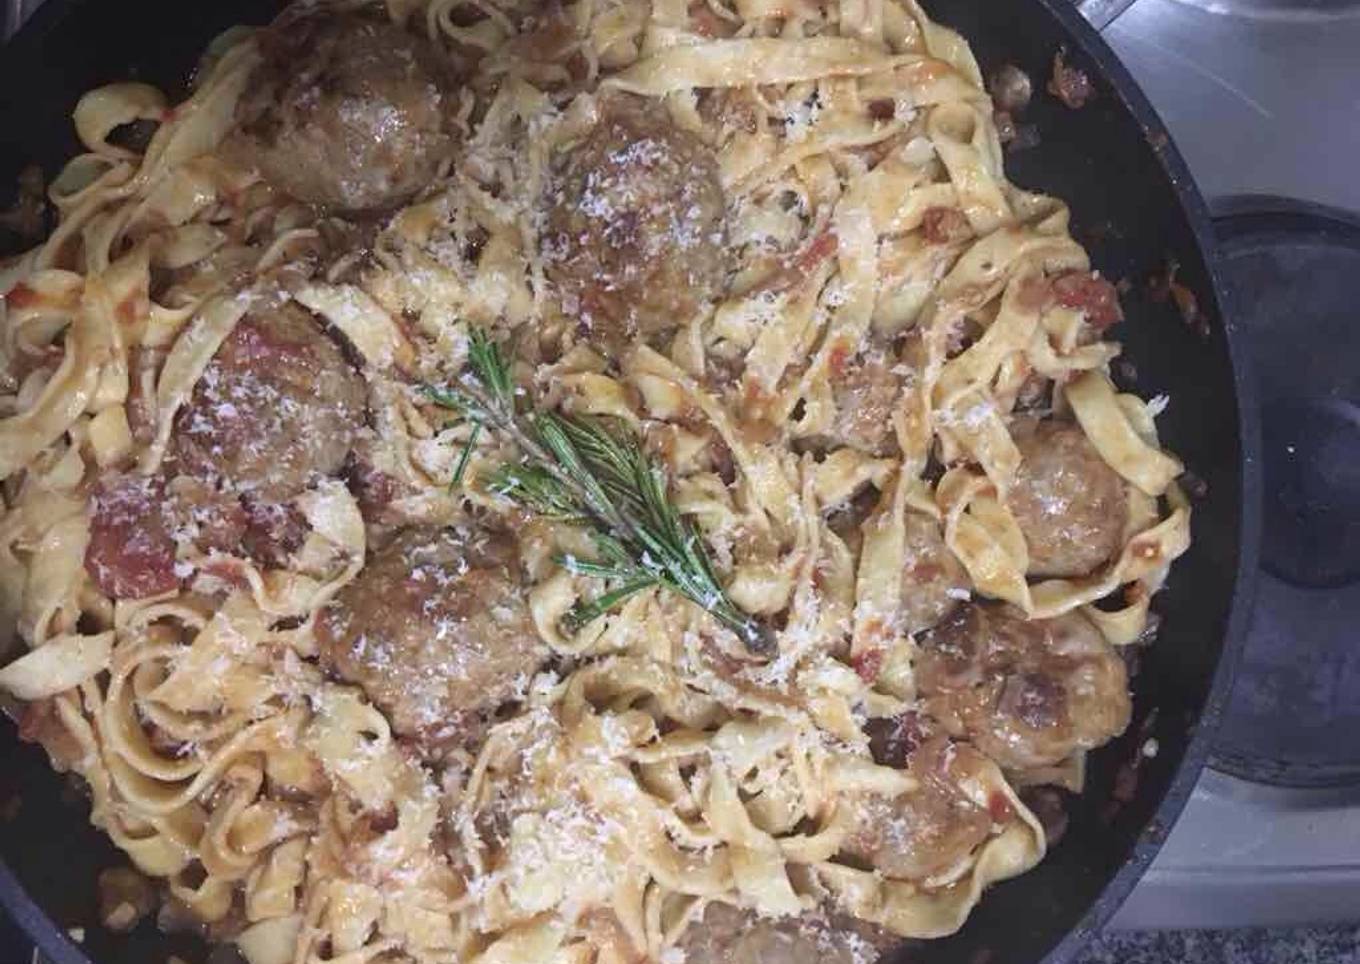 Pork and beef meatballs in a slow braised tomato sauce and pasta